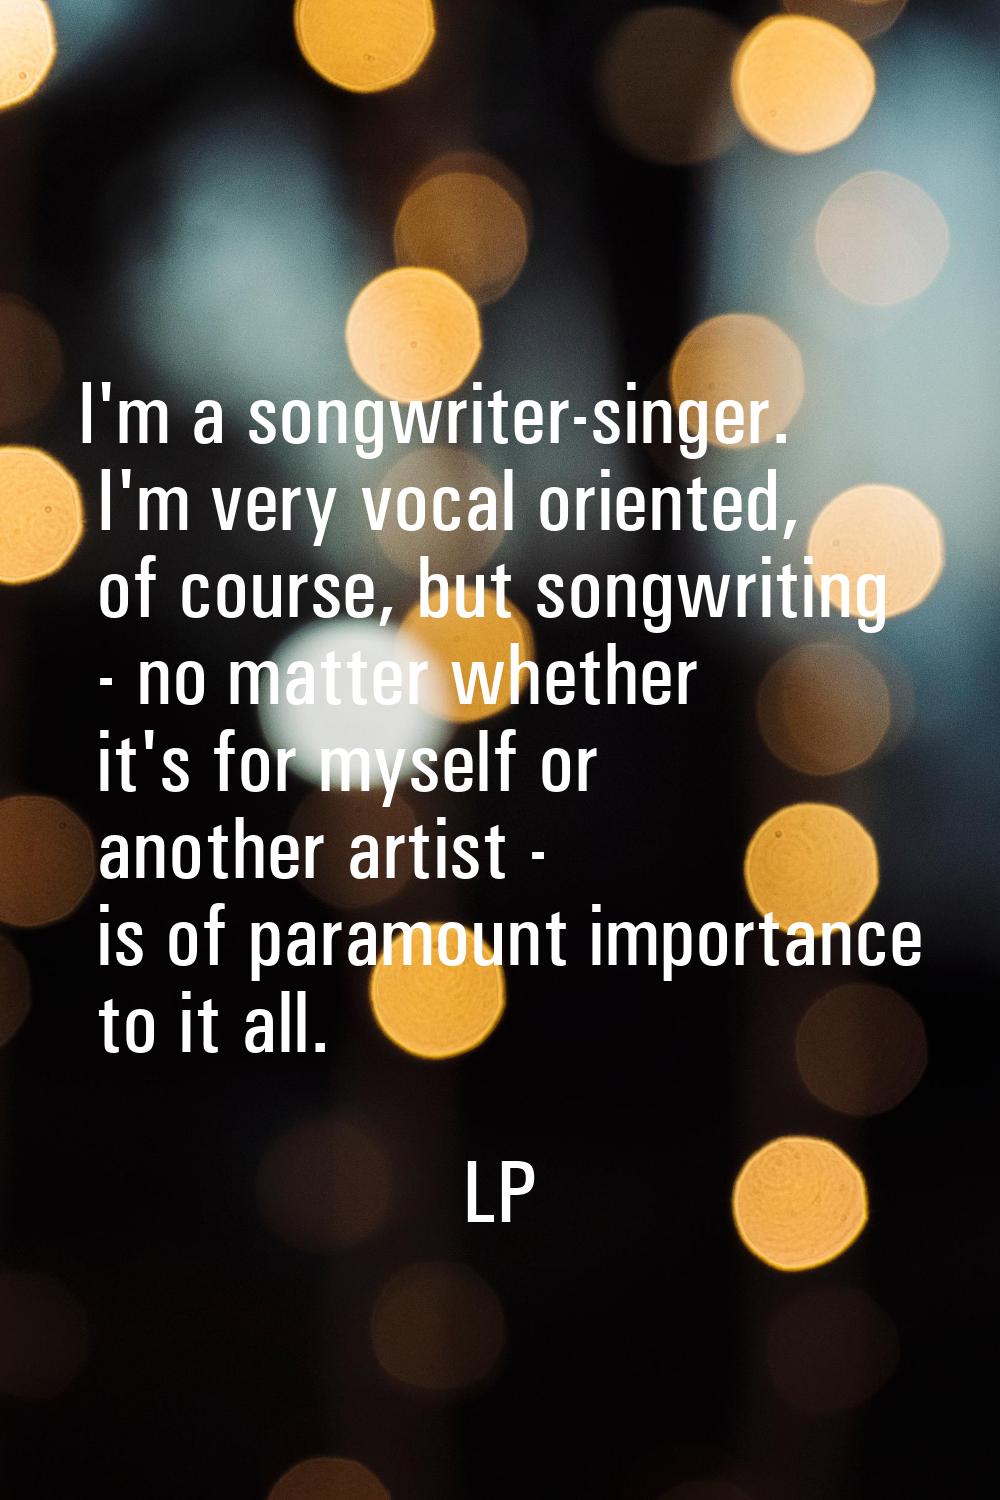 I'm a songwriter-singer. I'm very vocal oriented, of course, but songwriting - no matter whether it